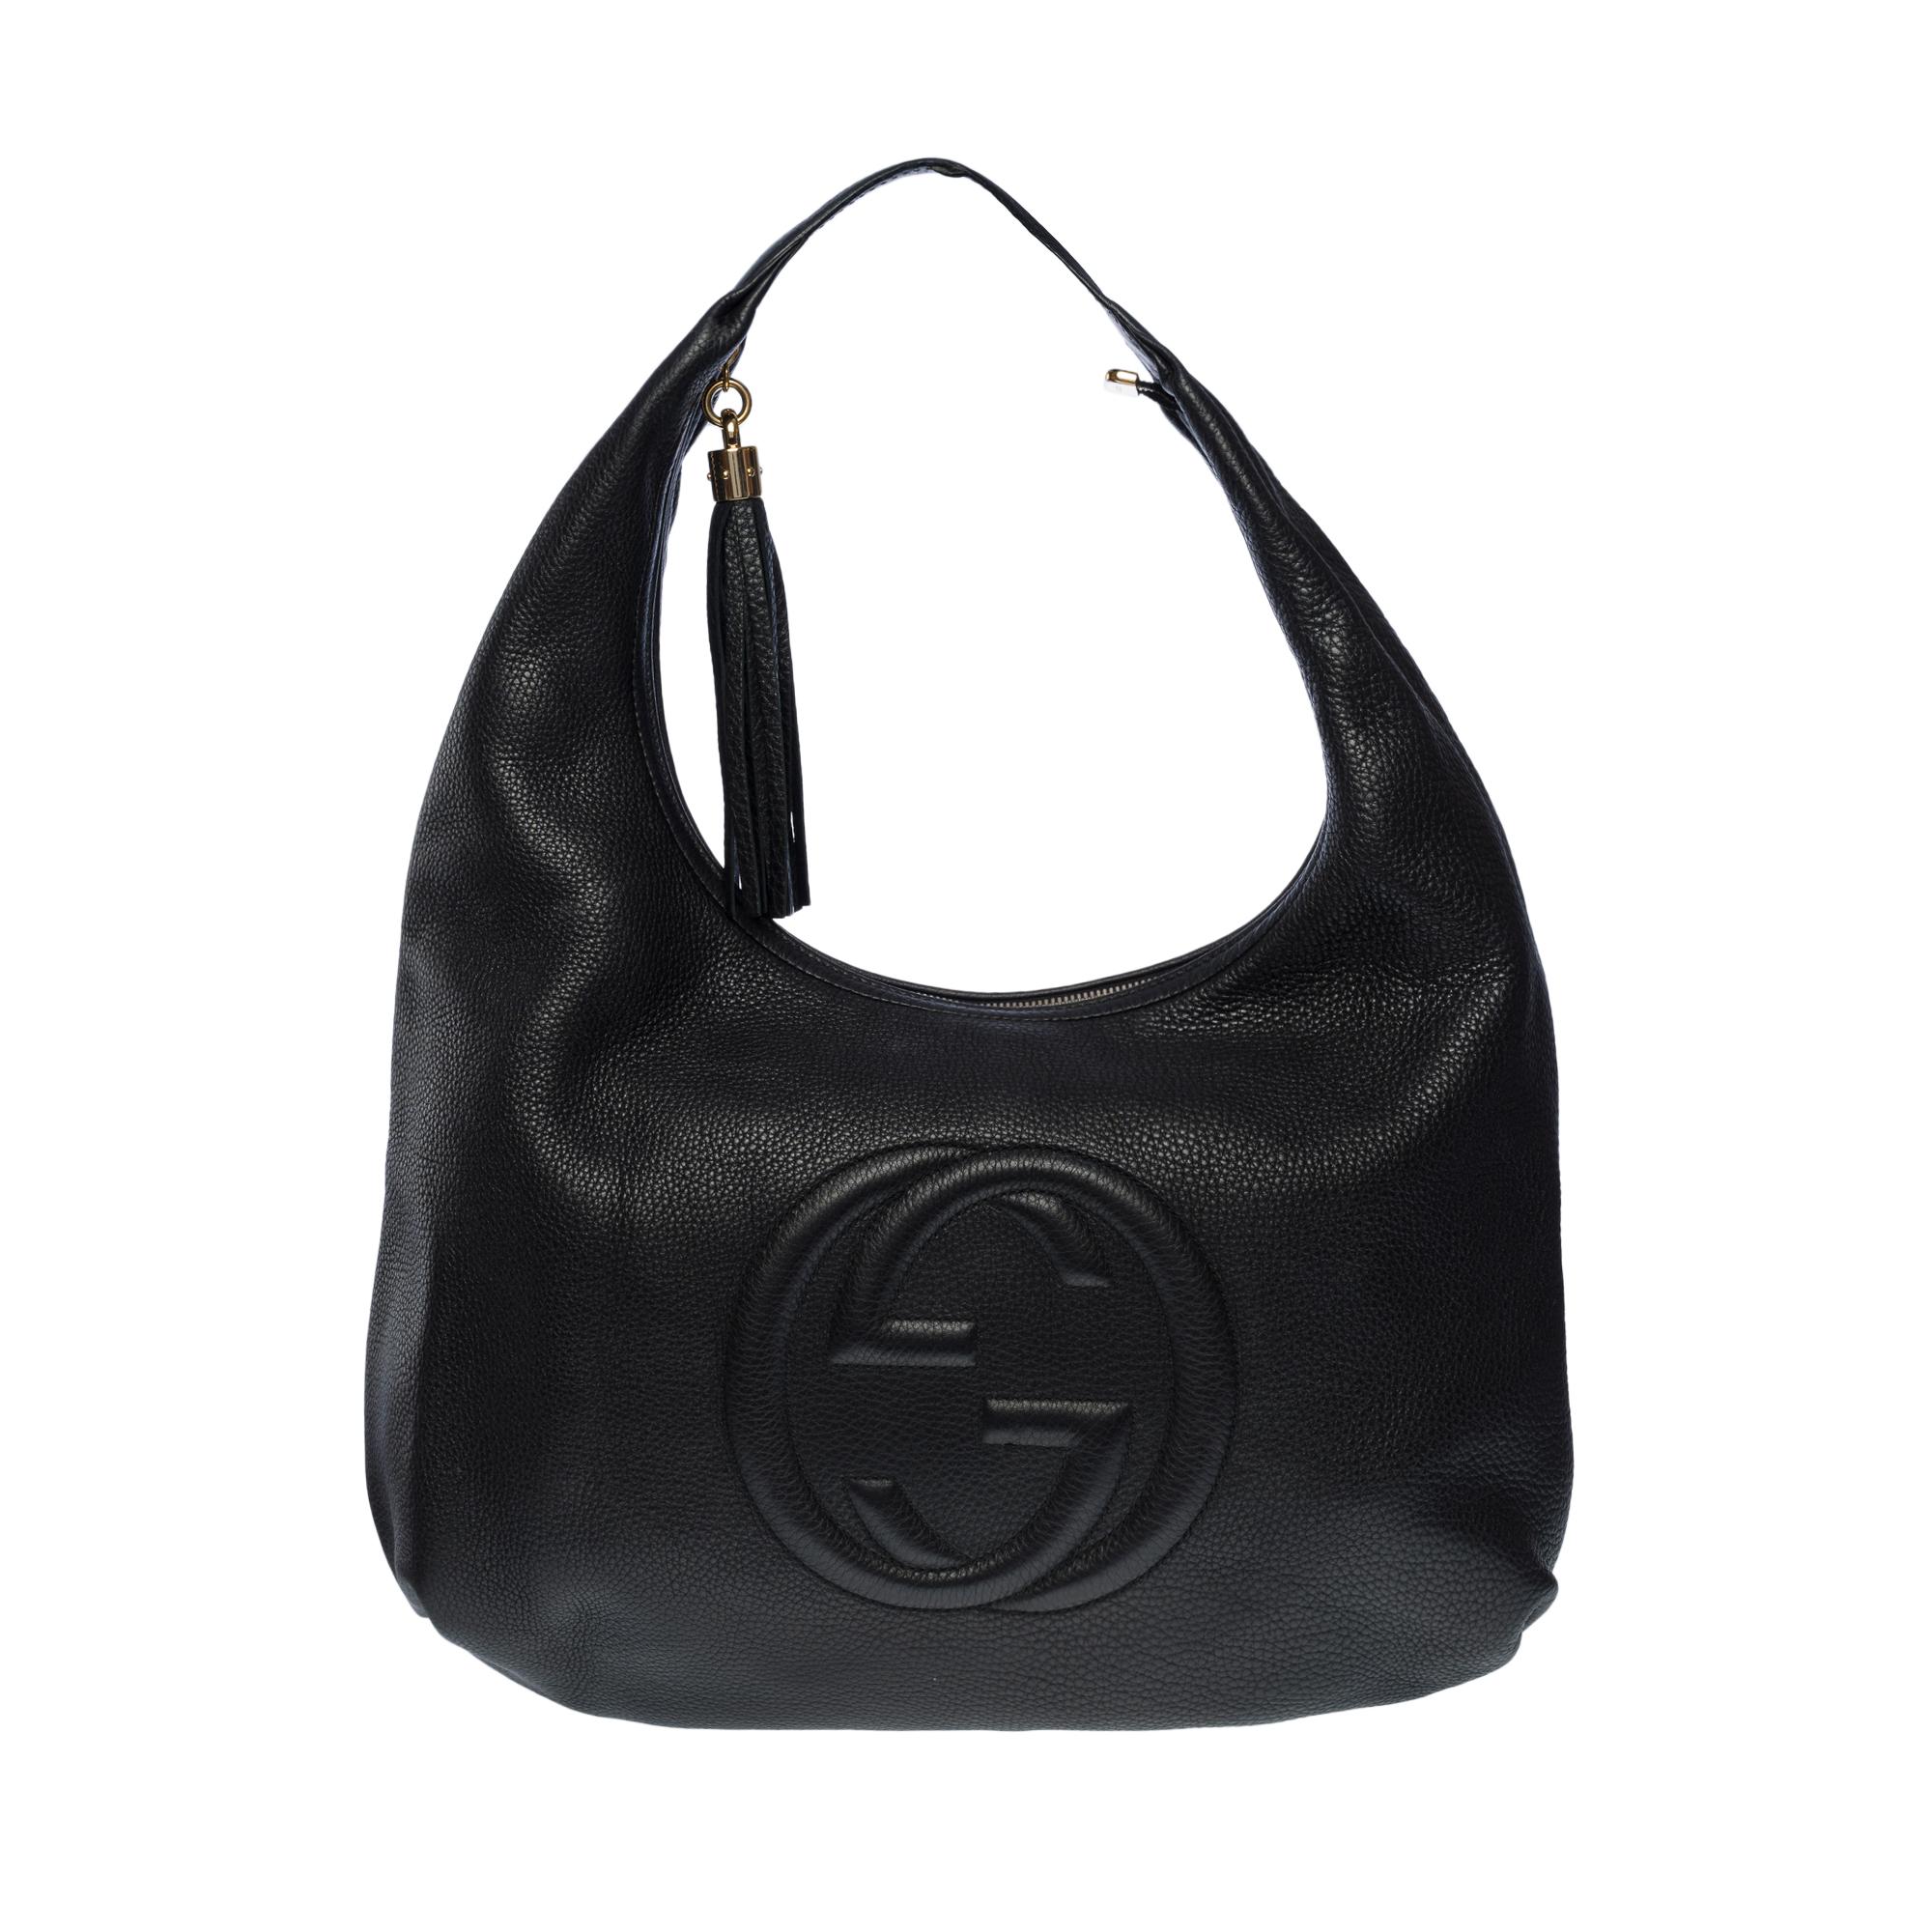 Lovely Gucci Soho GM hobo bag in black grained calf leather, gold metal hardware, black leather handle for shoulder support
top zipper closure, fringed pompom
Beige canvas lining, 1 zippered pocket, 2 patch pockets (cell phone slots and cigarette